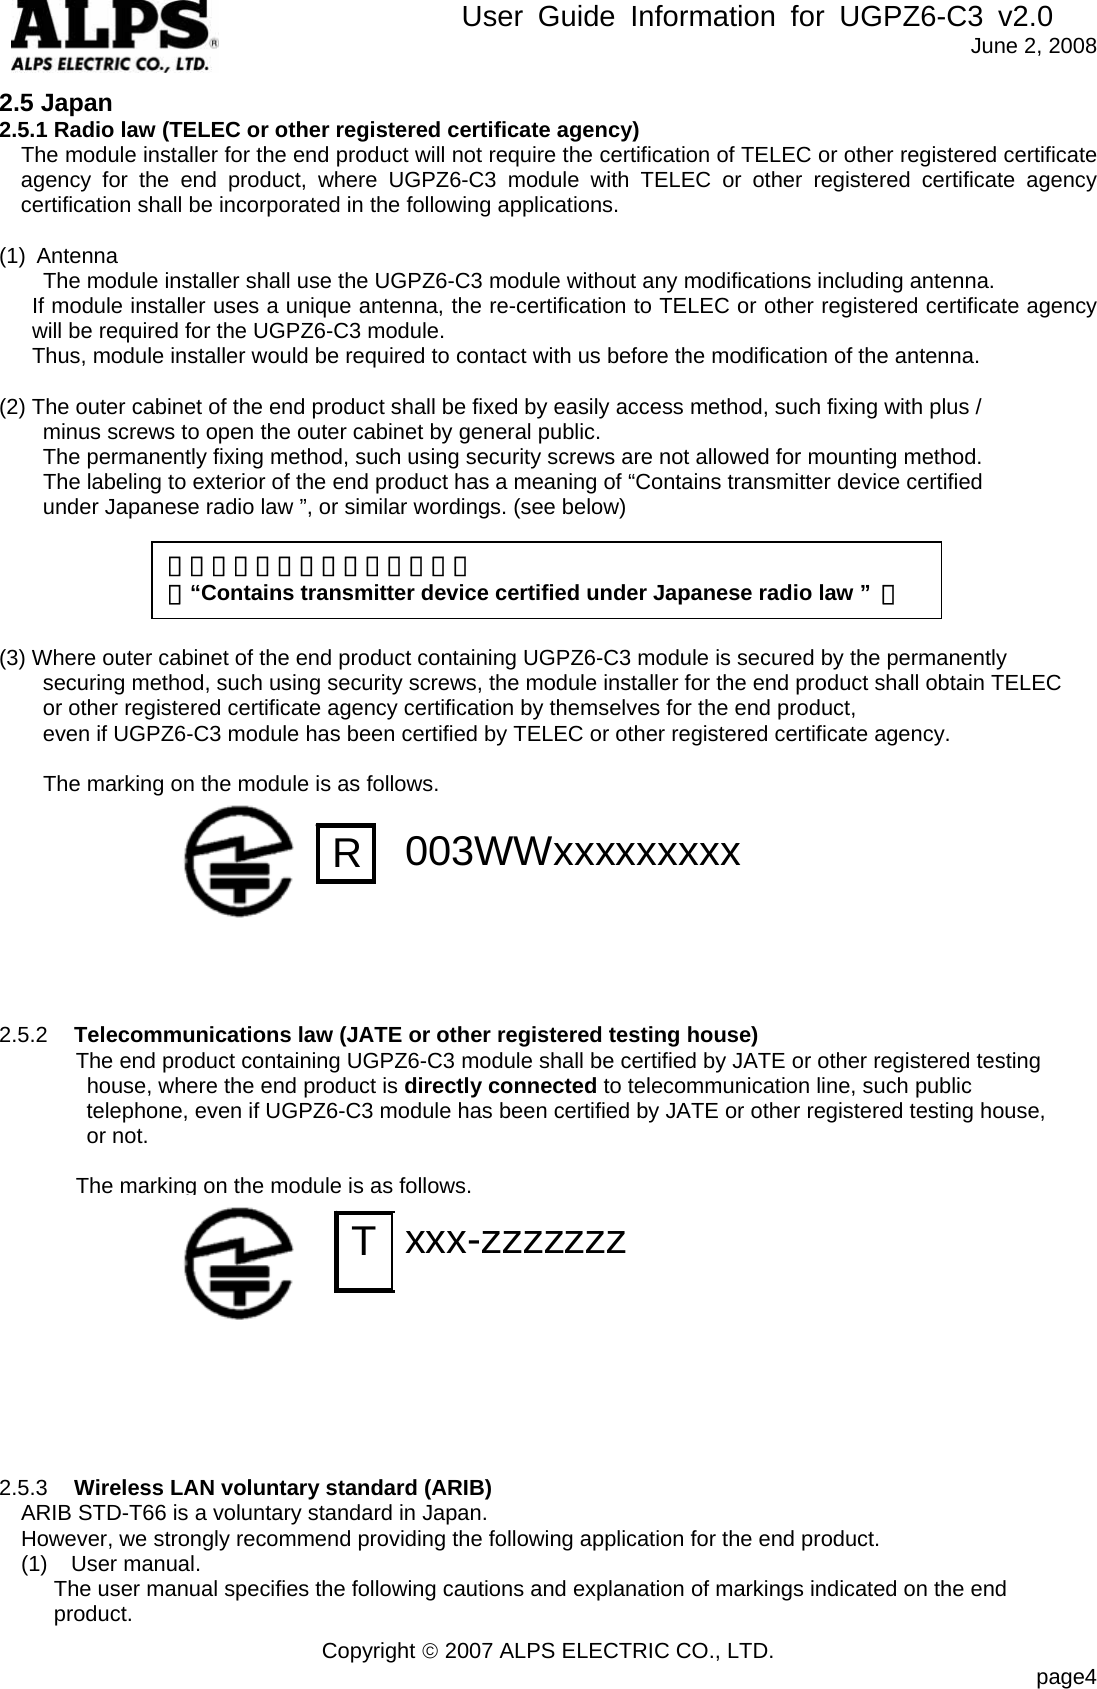        User Guide Information for UGPZ6-C3 v2.0               June 2, 2008 Copyright © 2007 ALPS ELECTRIC CO., LTD.                            page4 2.5 Japan 2.5.1 Radio law (TELEC or other registered certificate agency) The module installer for the end product will not require the certification of TELEC or other registered certificate agency for the end product, where UGPZ6-C3 module with TELEC or other registered certificate agency certification shall be incorporated in the following applications.  (1) Antenna       The module installer shall use the UGPZ6-C3 module without any modifications including antenna.   If module installer uses a unique antenna, the re-certification to TELEC or other registered certificate agency   will be required for the UGPZ6-C3 module.       Thus, module installer would be required to contact with us before the modification of the antenna.  (2) The outer cabinet of the end product shall be fixed by easily access method, such fixing with plus /   minus screws to open the outer cabinet by general public.   The permanently fixing method, such using security screws are not allowed for mounting method.     The labeling to exterior of the end product has a meaning of “Contains transmitter device certified   under Japanese radio law ”, or similar wordings. (see below)      (3) Where outer cabinet of the end product containing UGPZ6-C3 module is secured by the permanently   securing method, such using security screws, the module installer for the end product shall obtain TELEC or other registered certificate agency certification by themselves for the end product,   even if UGPZ6-C3 module has been certified by TELEC or other registered certificate agency.          The marking on the module is as follows.          2.5.2  Telecommunications law (JATE or other registered testing house) The end product containing UGPZ6-C3 module shall be certified by JATE or other registered testing   house, where the end product is directly connected to telecommunication line, such public   telephone, even if UGPZ6-C3 module has been certified by JATE or other registered testing house,   or not.                The marking on the module is as follows.                         2.5.3  Wireless LAN voluntary standard (ARIB) ARIB STD-T66 is a voluntary standard in Japan. However, we strongly recommend providing the following application for the end product. (1) User manual.       The user manual specifies the following cautions and explanation of markings indicated on the end    product. 「電波法適合無線設備を内蔵」 （“Contains transmitter device certified under Japanese radio law ”  ） R  003WWxxxxxxxxx  T  xxx-zzzzzzz  